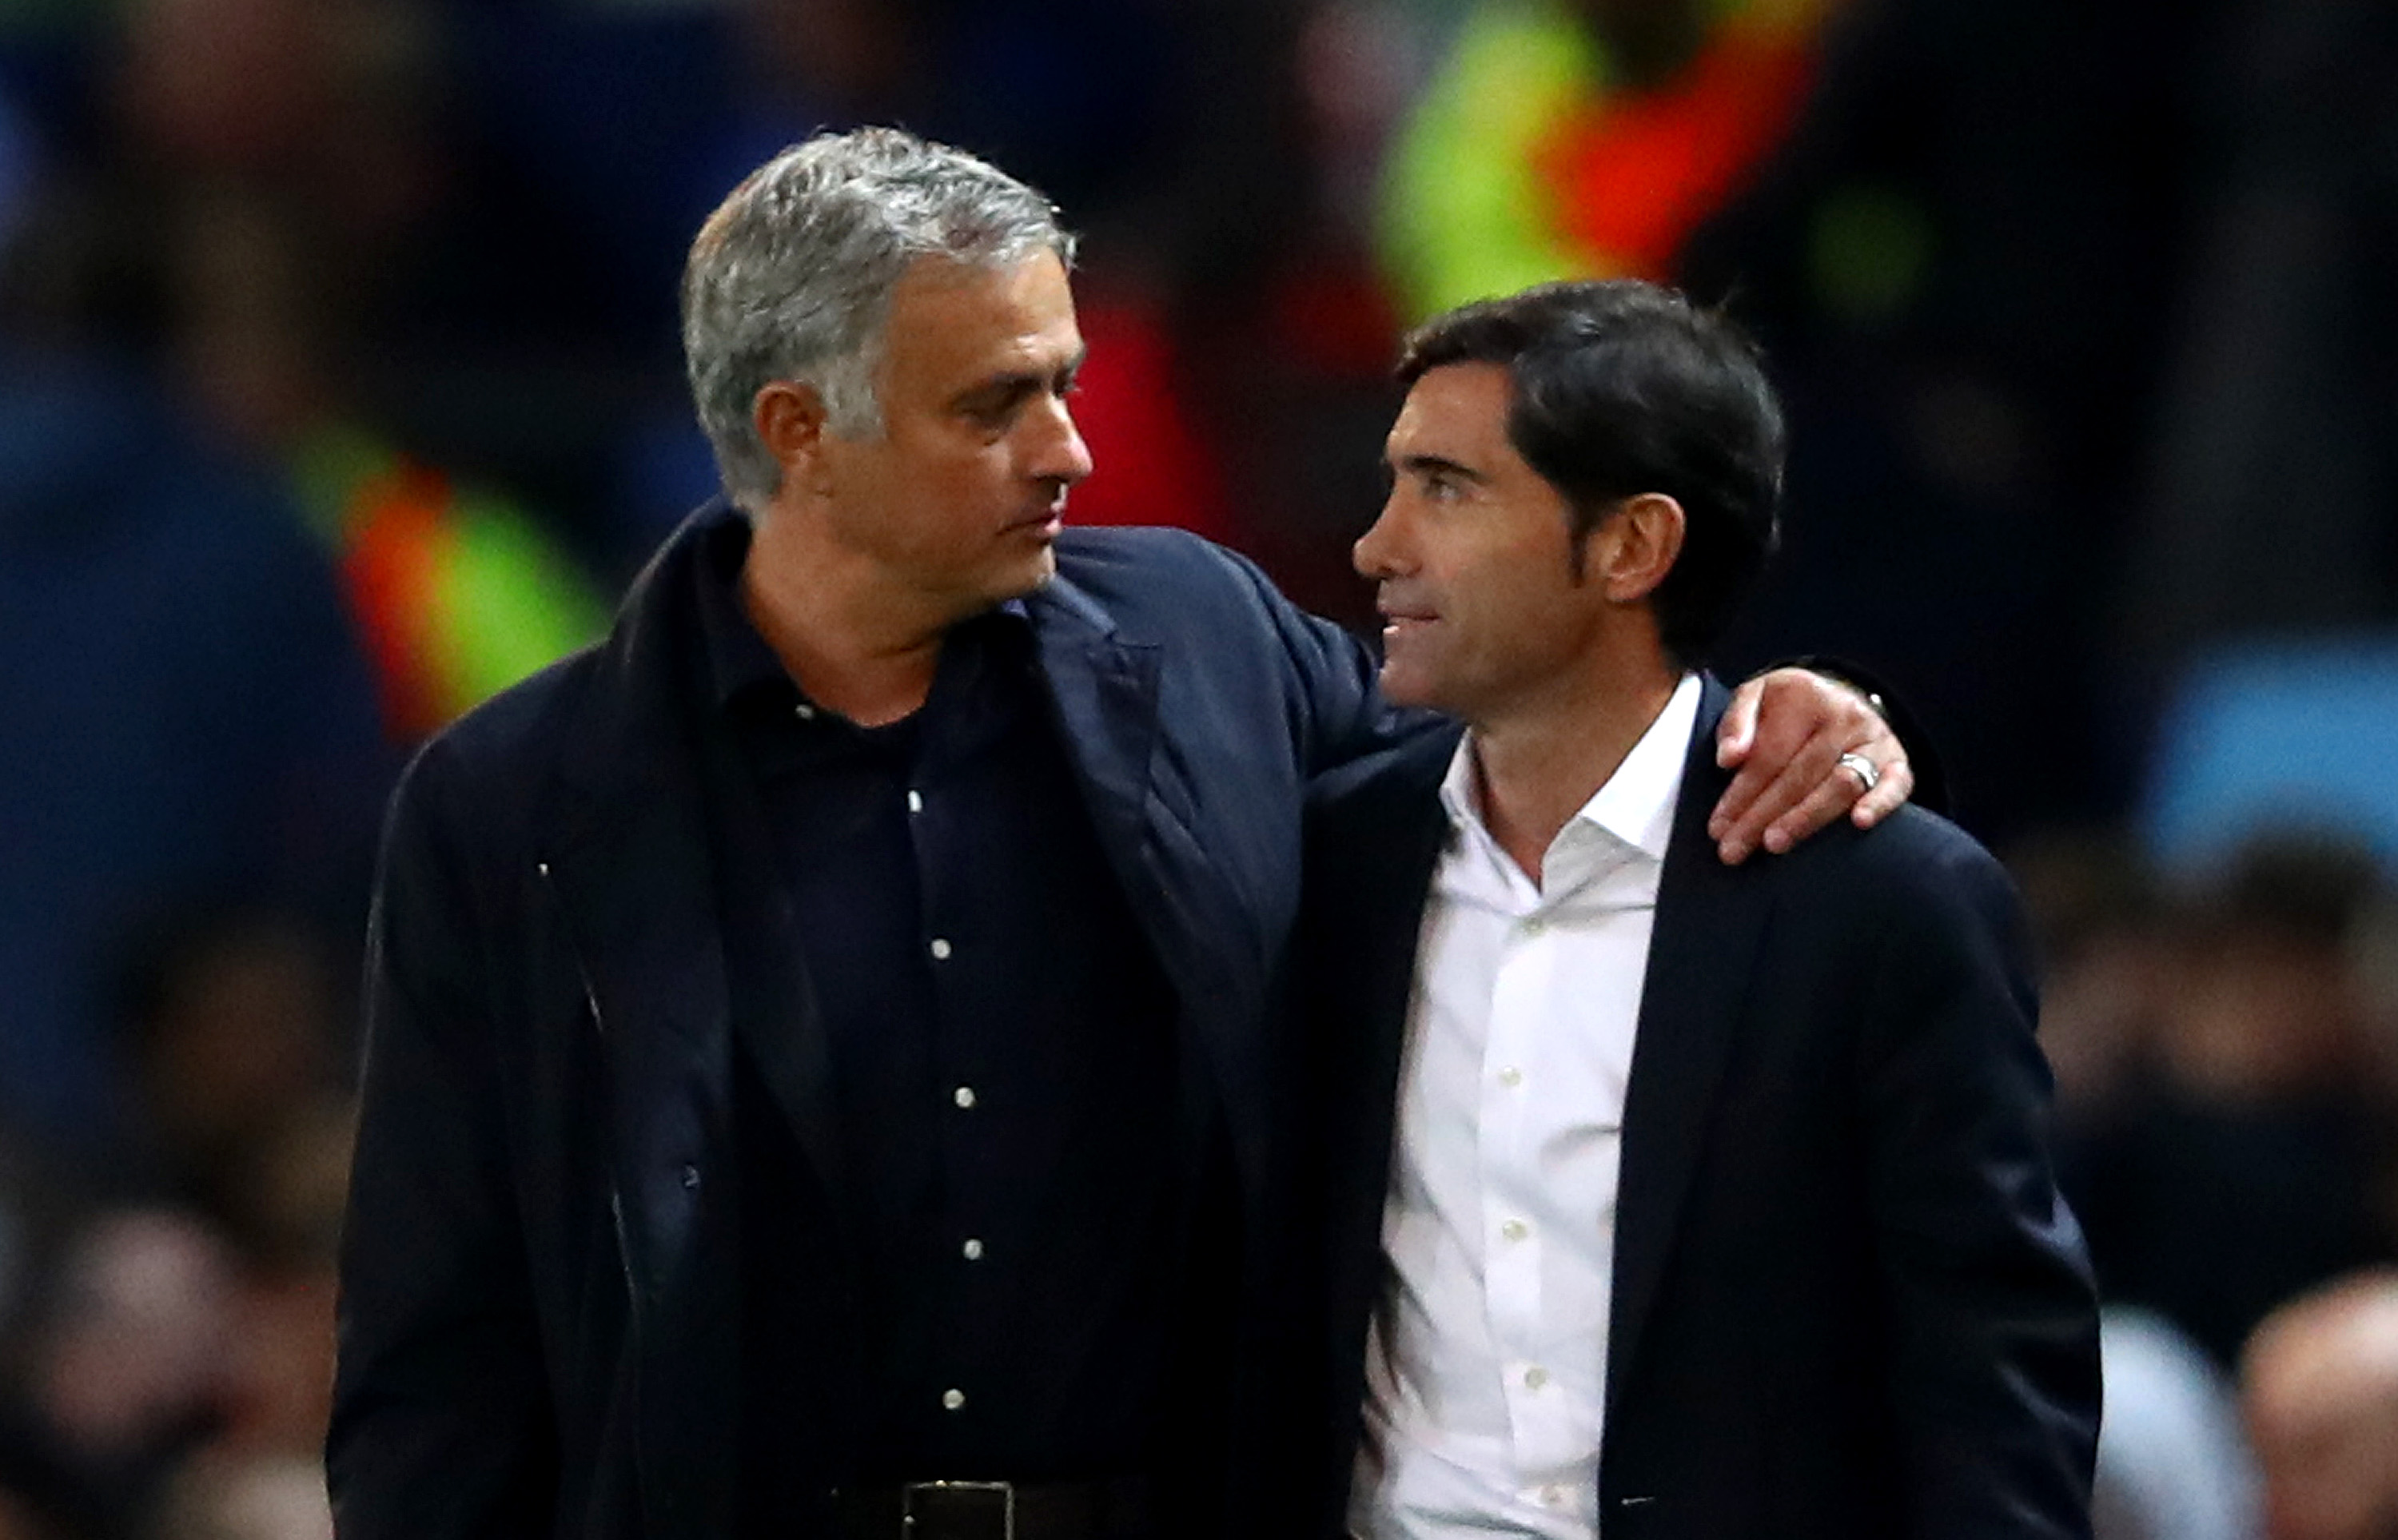 MANCHESTER, ENGLAND - OCTOBER 02:  Jose Mourinho, Manager of Manchester United speaks with Marcelino Garcia Toral, Manager of Valencia after the Group H match of the UEFA Champions League between Manchester United and Valencia at Old Trafford on October 2, 2018 in Manchester, United Kingdom.  (Photo by Clive Brunskill/Getty Images)